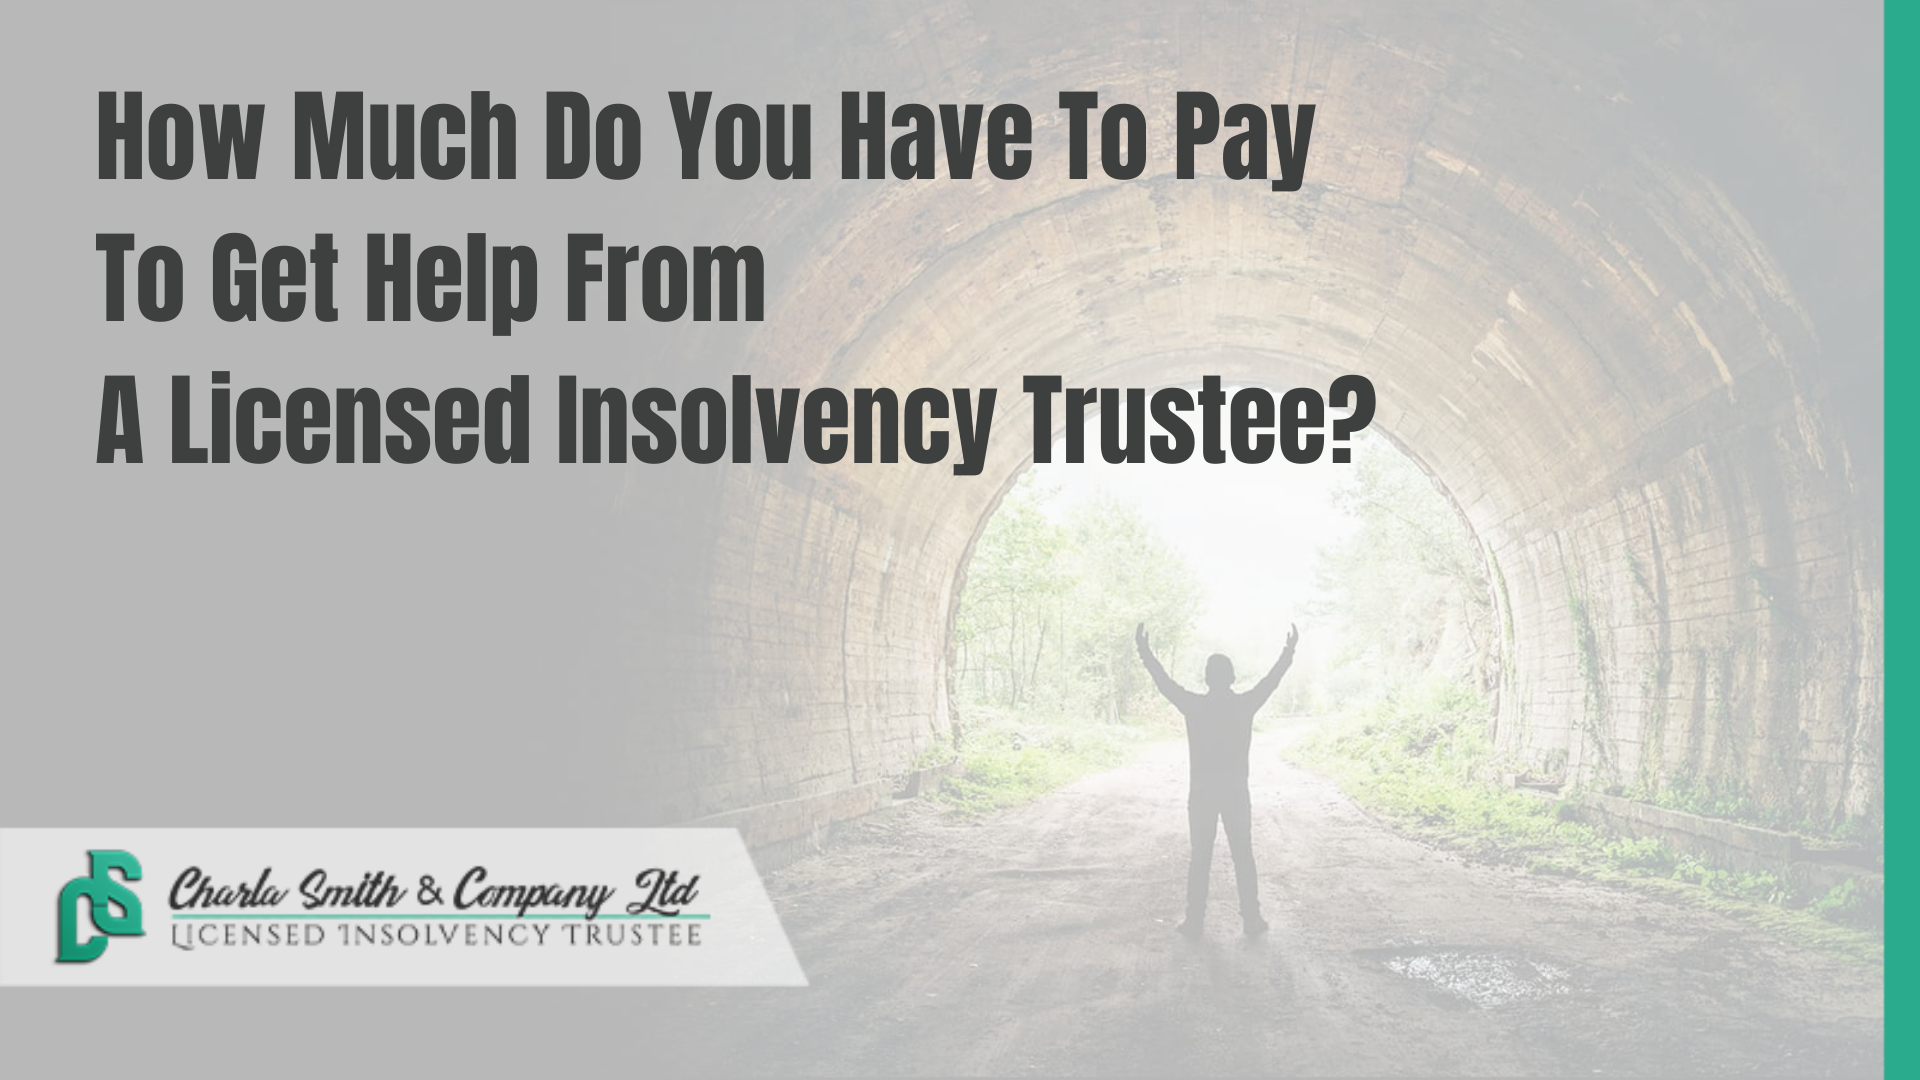 How Much Do You Have To Pay To Get Help From A Licensed Insolvency Trustee?